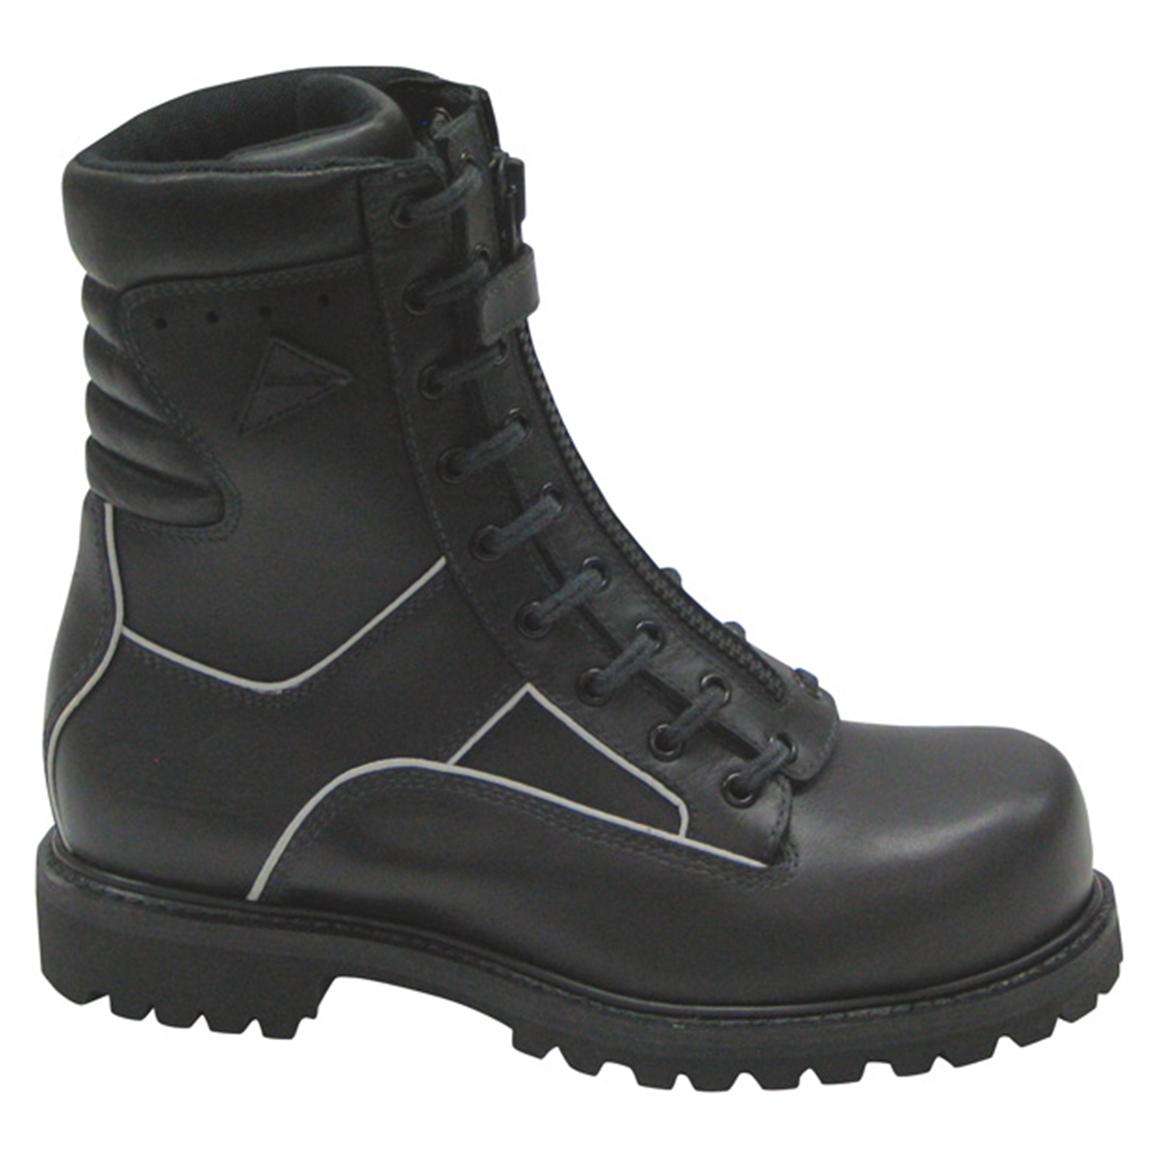 Women's Thorogood® 8" Power EMS / Wildland Boots, Black - 150801, Combat & Tactical Boots at ...